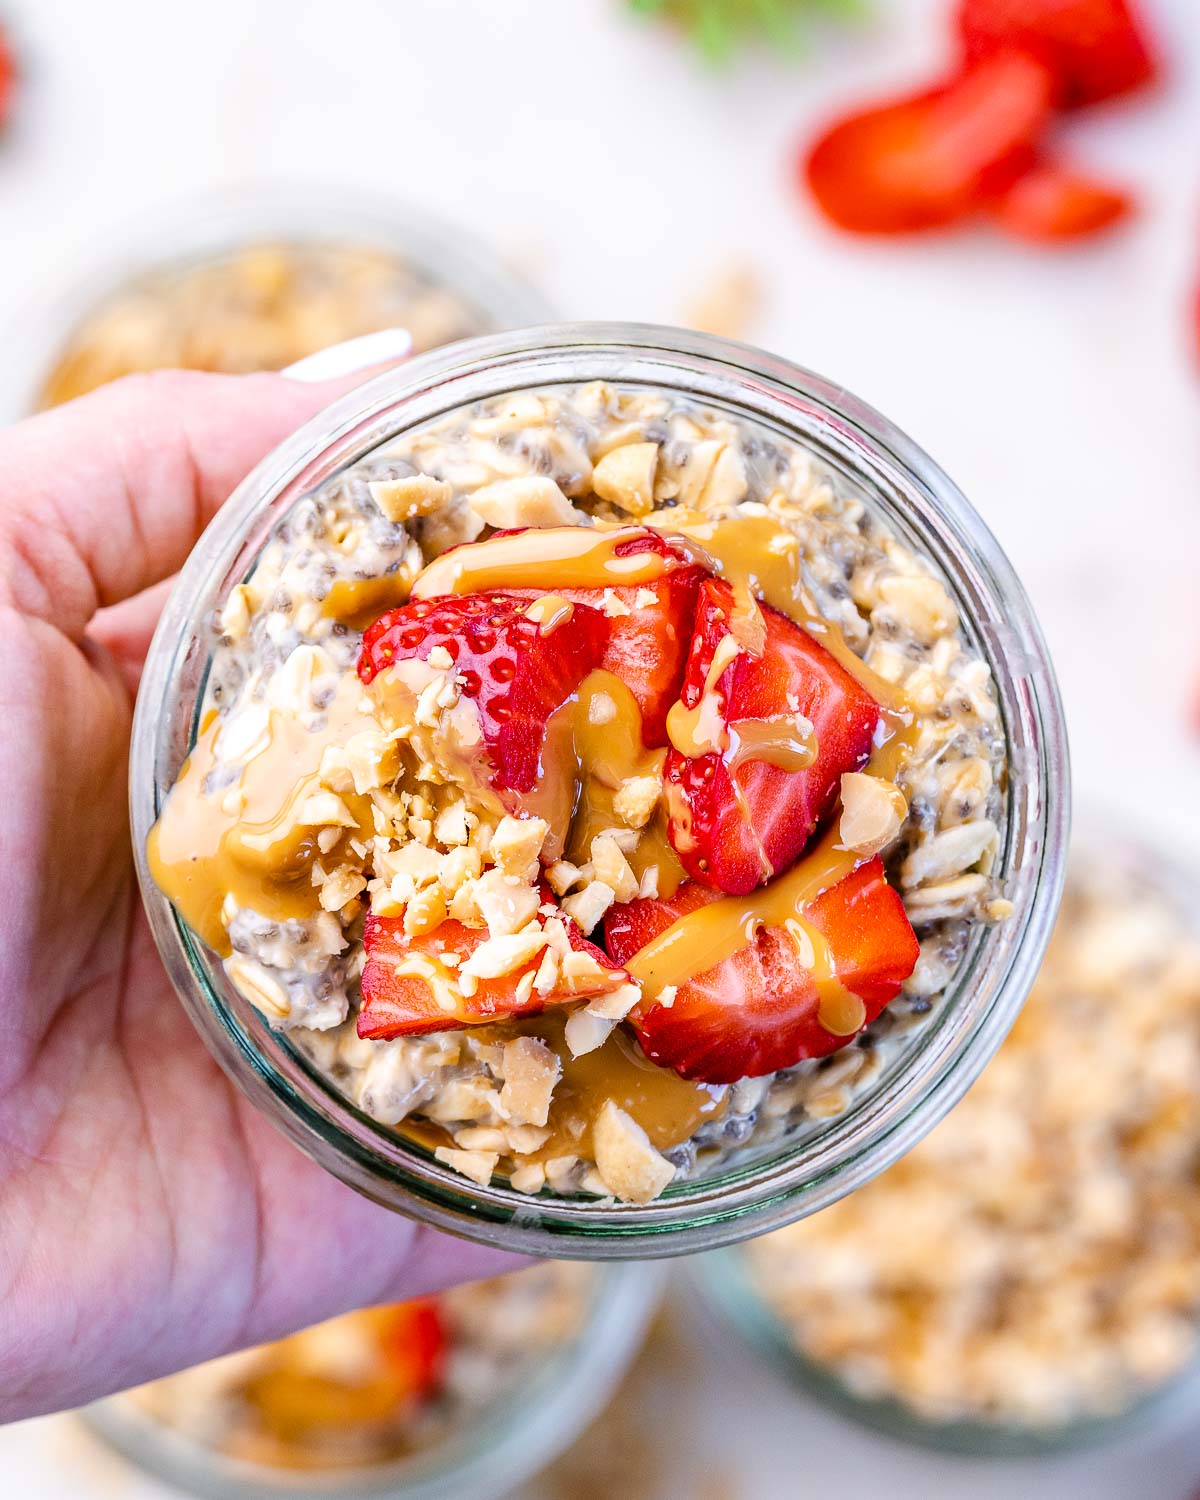 https://cleanfoodcrush.com/wp-content/uploads/2021/04/Clean-Food-Crush-Peanut-Butter-Overnight-Oats-Clean-Eating-Meal-Prep-Recipe.jpg